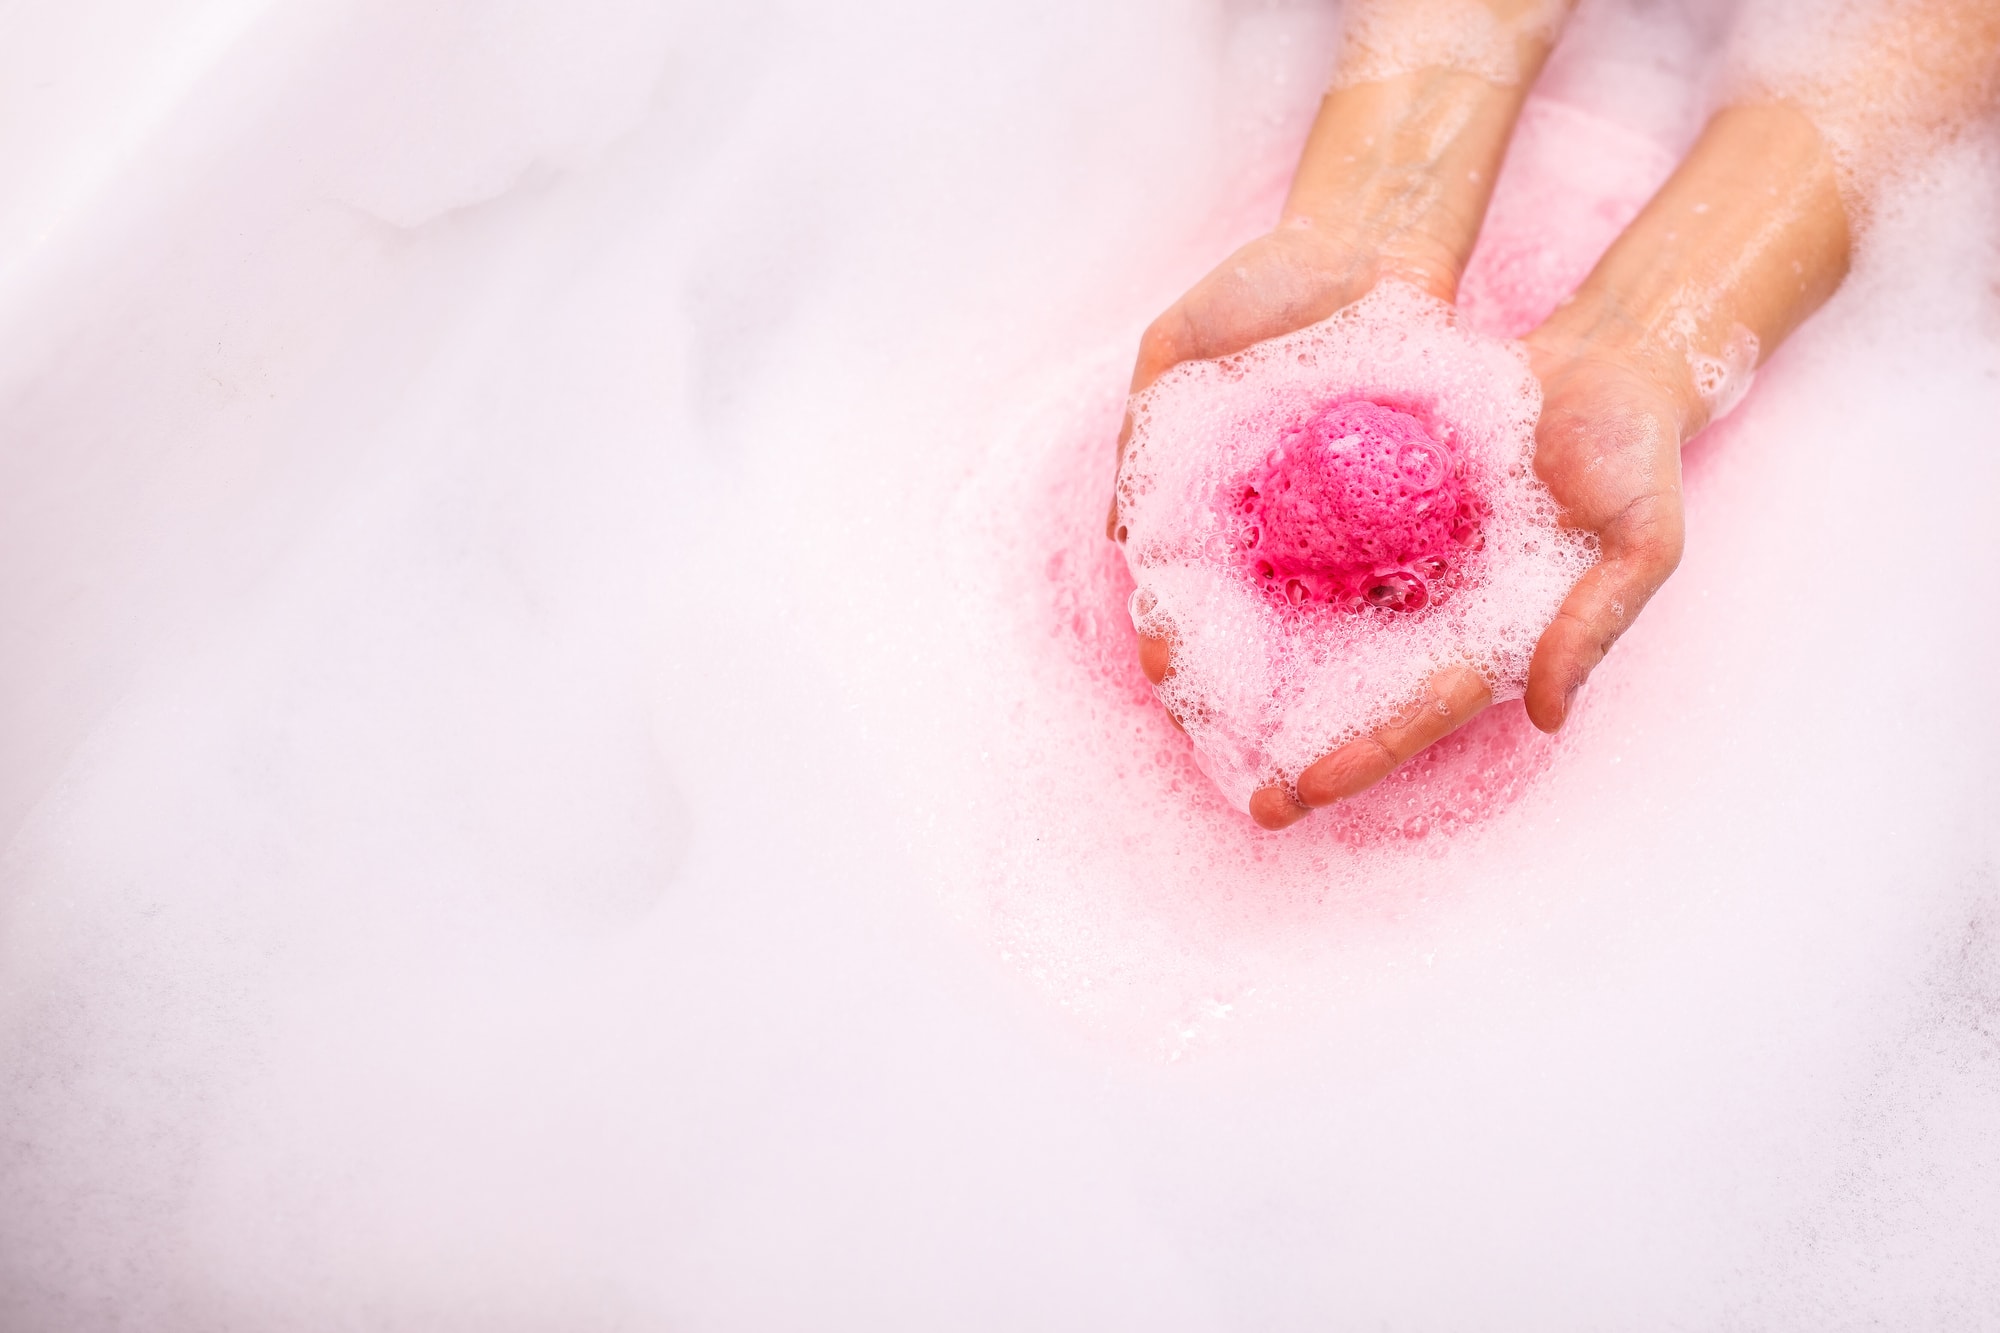 Can Bath Bombs Dry Out Your Skin?